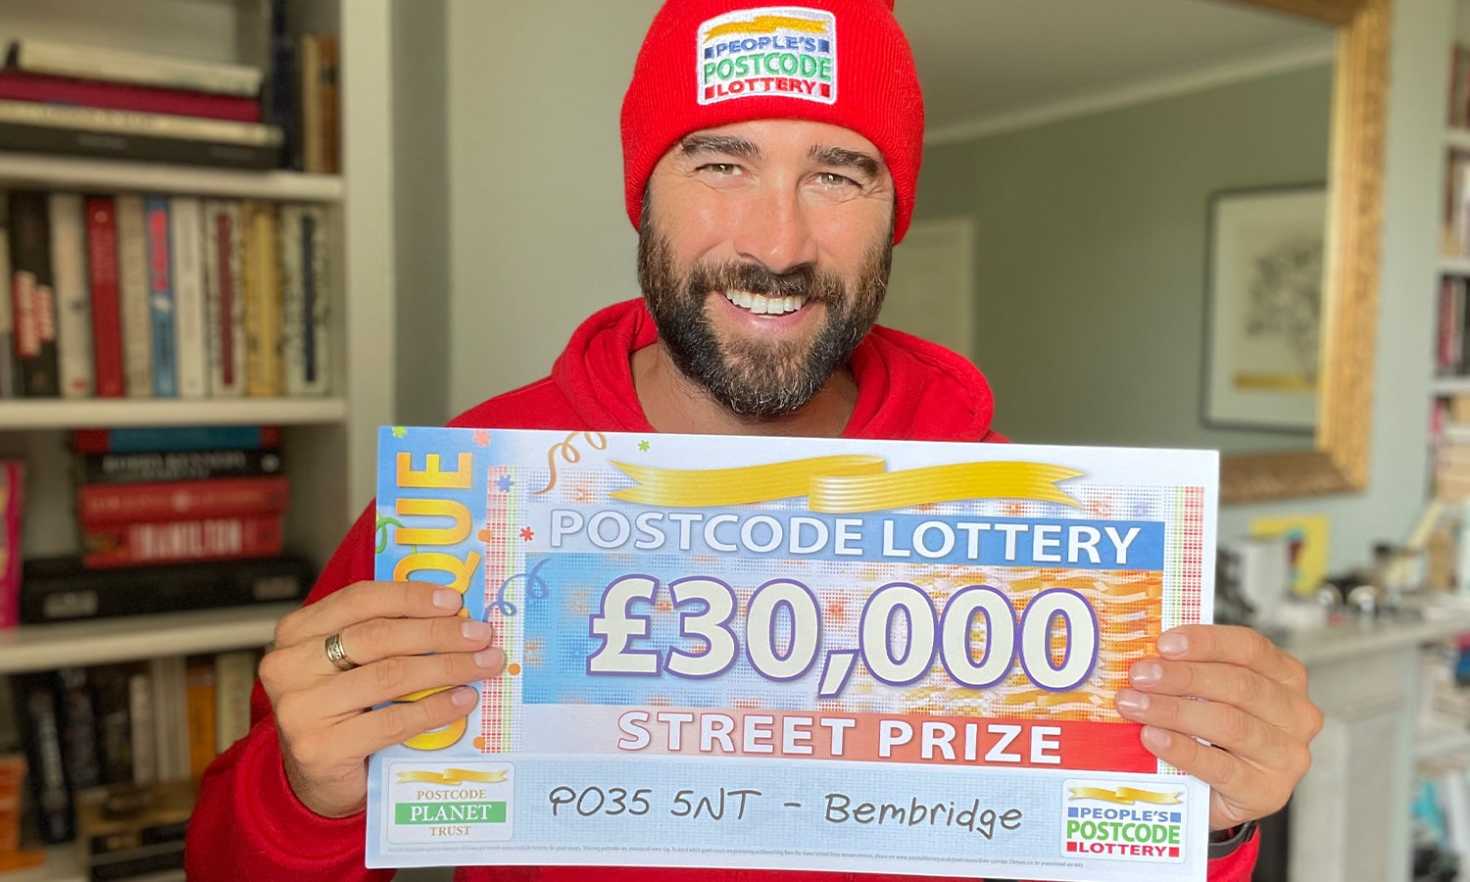 Today's £30,000 Street Prize is heading to a lucky winner in Bembridge